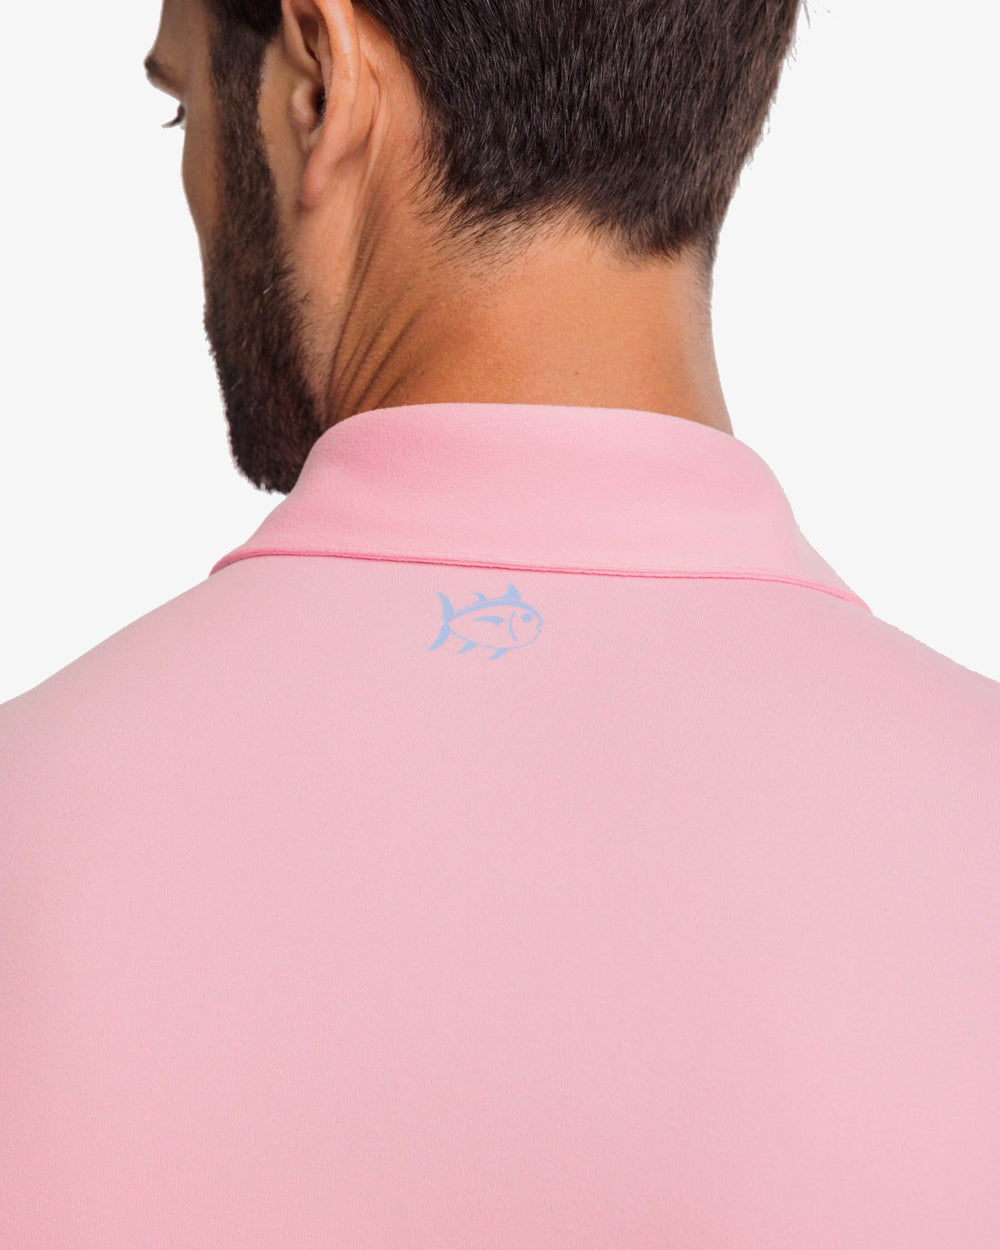 The yoke view of the Southern Tide Ryder Lilly Polo Shirt by Southern Tide - Mandevilla Baby